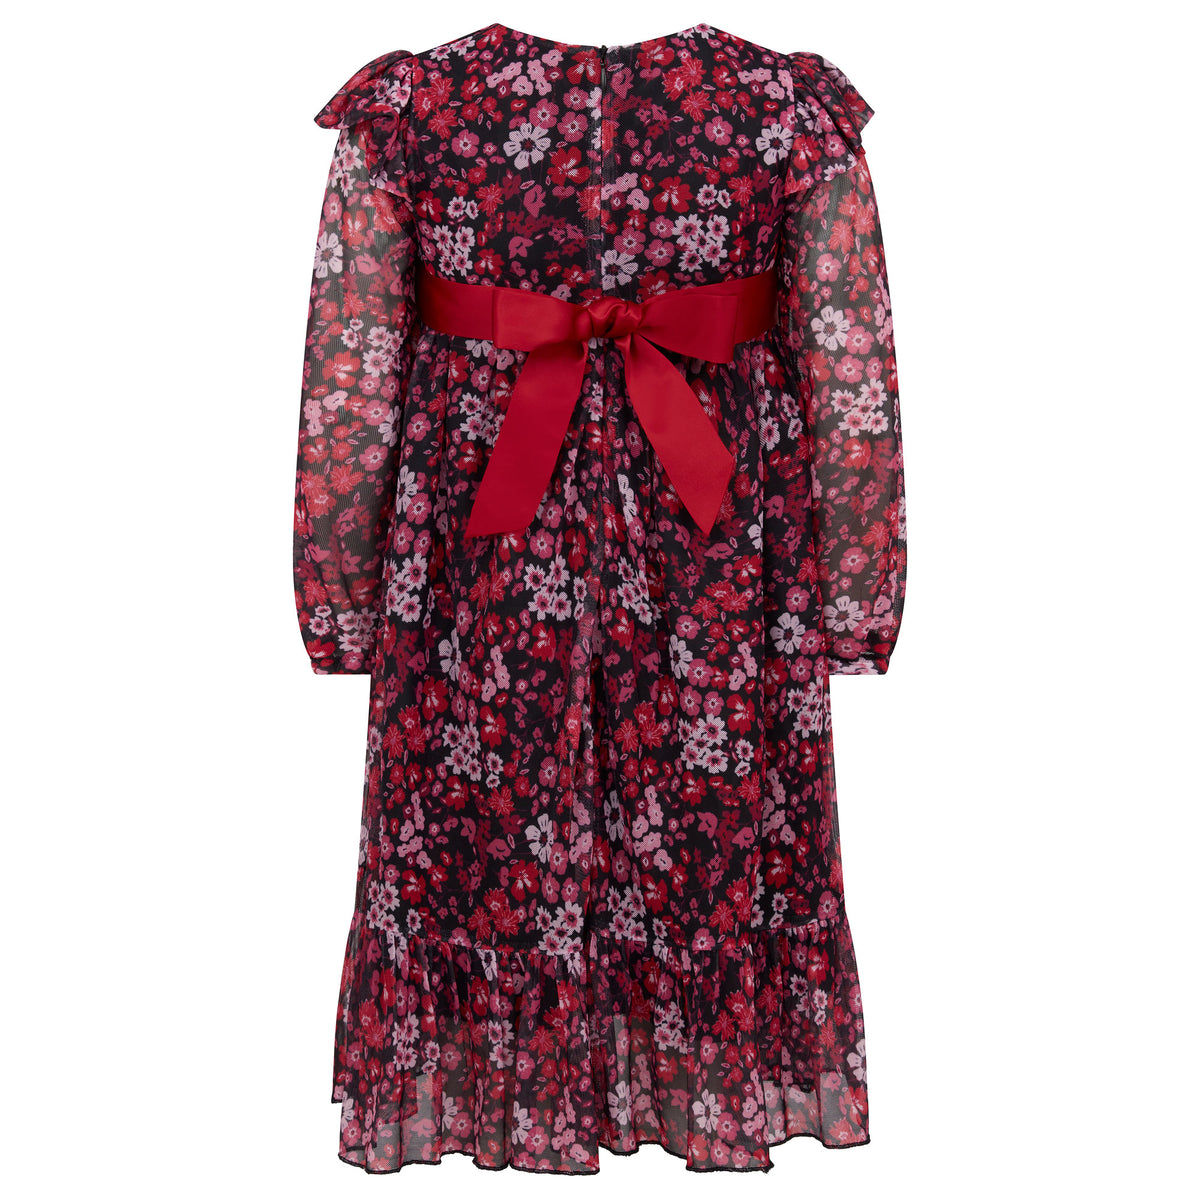 Chloe Winter Floral Girls Party Dress Pink | Holly Hastie London